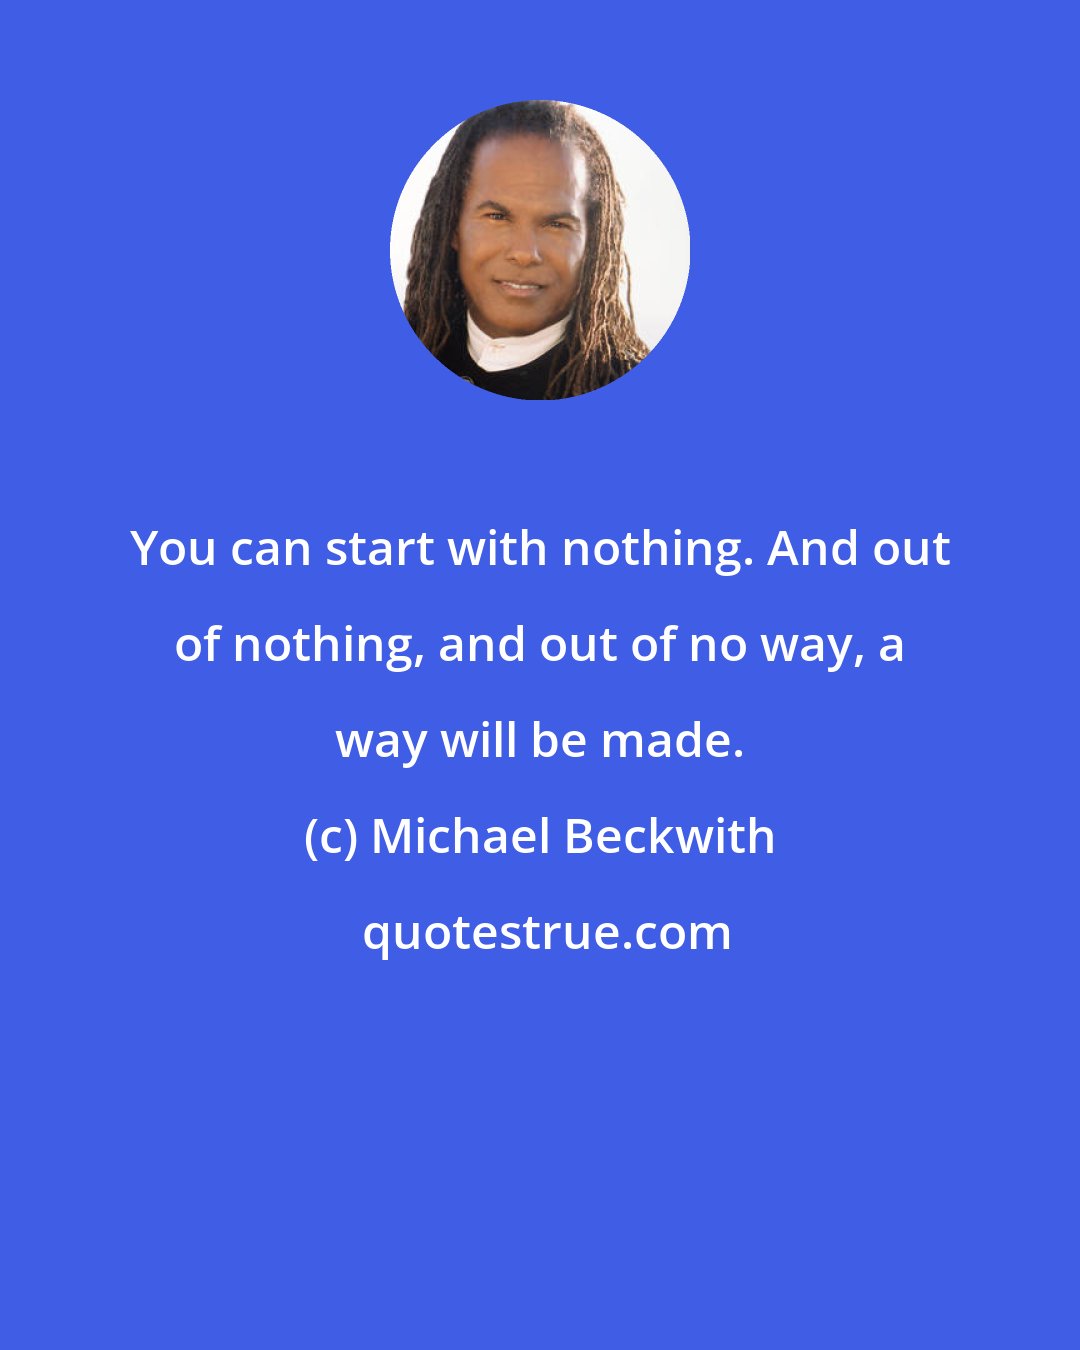 Michael Beckwith: You can start with nothing. And out of nothing, and out of no way, a way will be made.